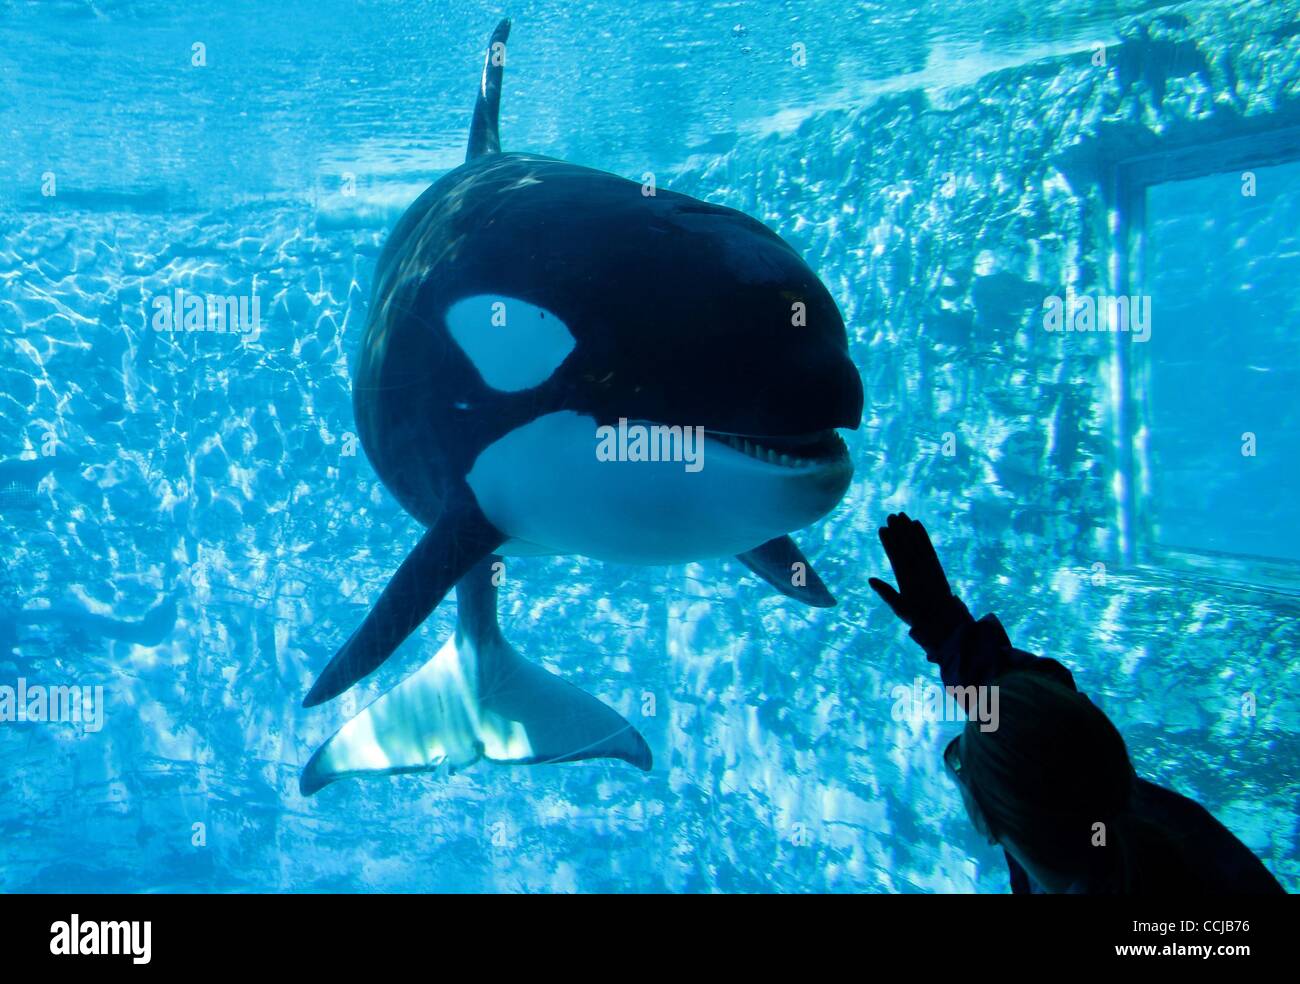 Dec 15, 2010 - Orlando, Florida, USA - A tourist at the Shamu exhibit at Sea World Orlando interacting with a whale. After the tragic death of a whale trainer in February 2010, Sea World intends to launch an all new killer whale show in Spring 2011 to distance itself from the accident. (Credit Image Stock Photo